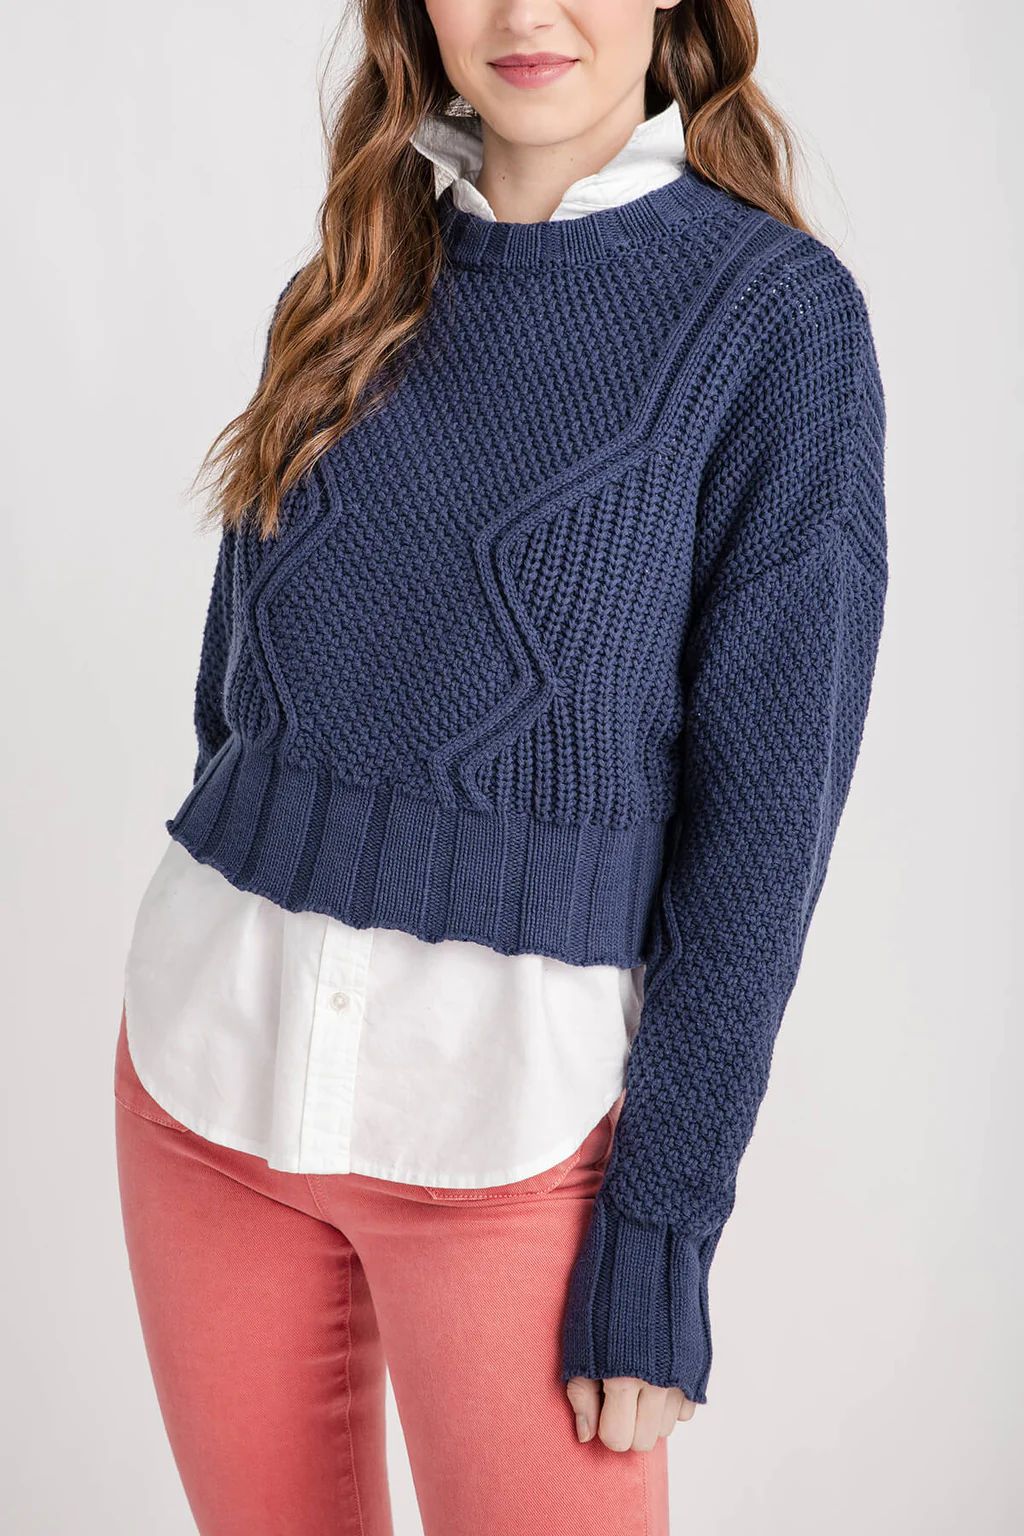 All Row Cotton Cable Sweater | Social Threads